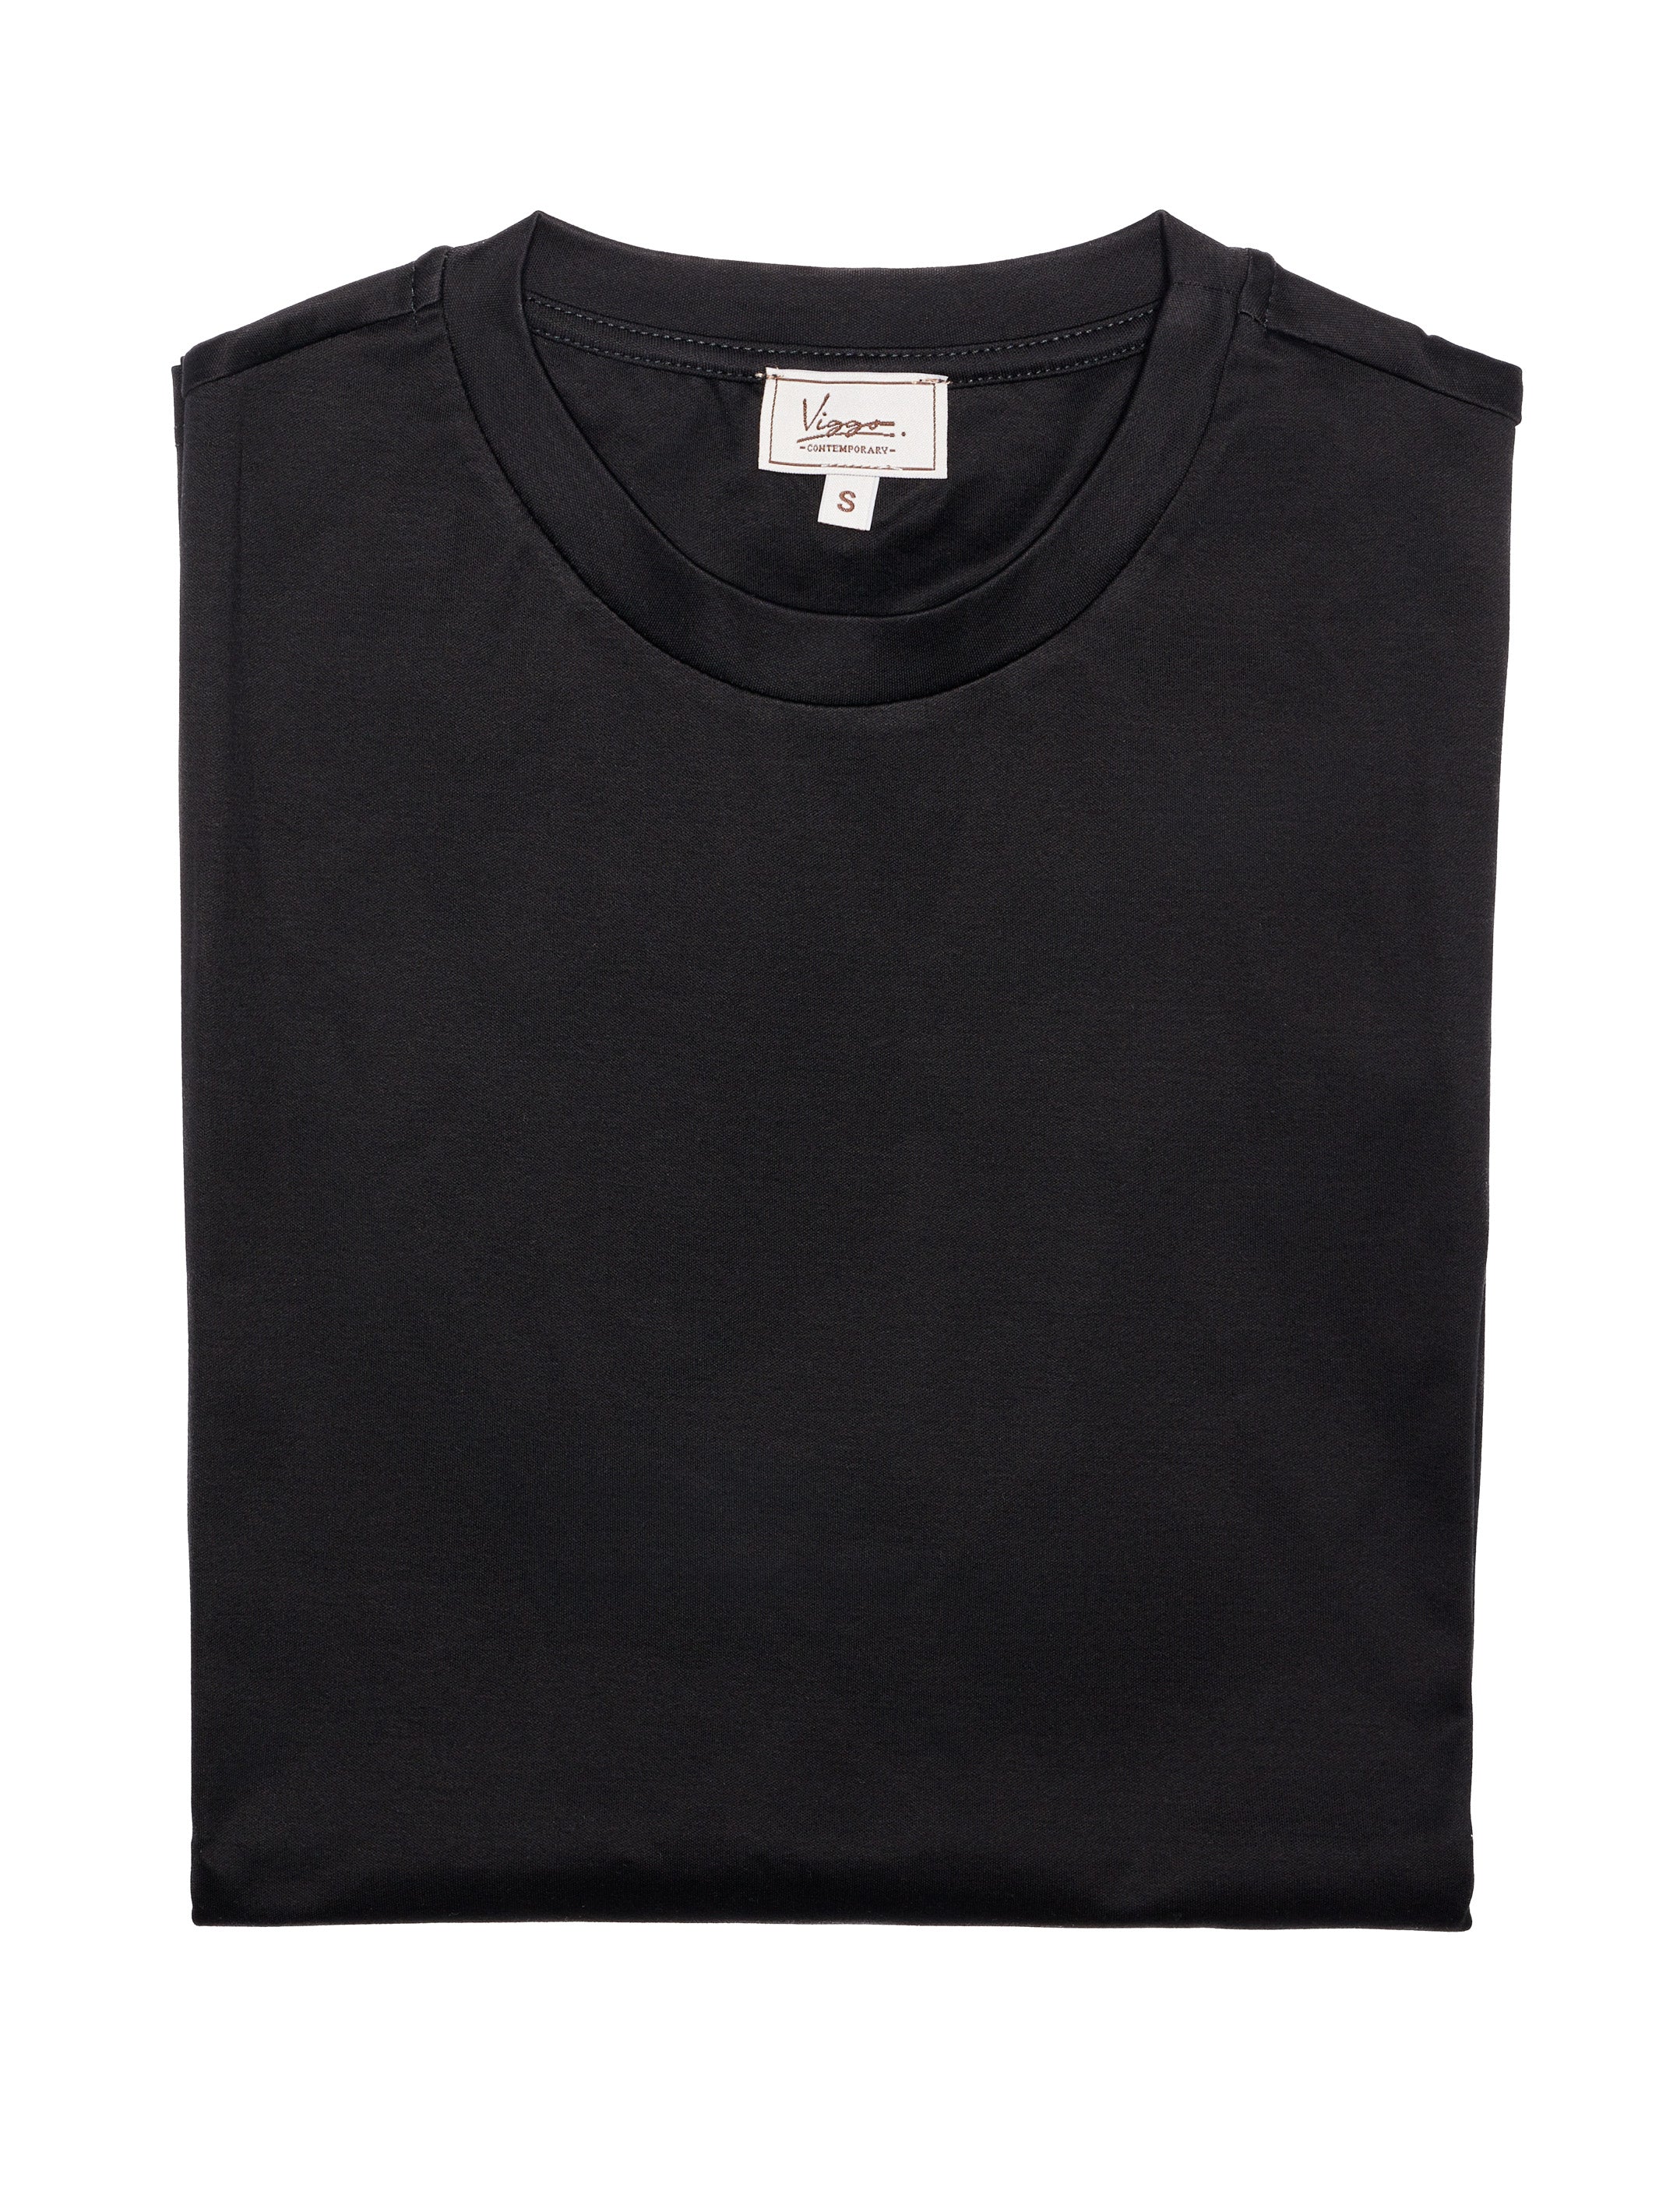 Black cotton t-shirt with octagon